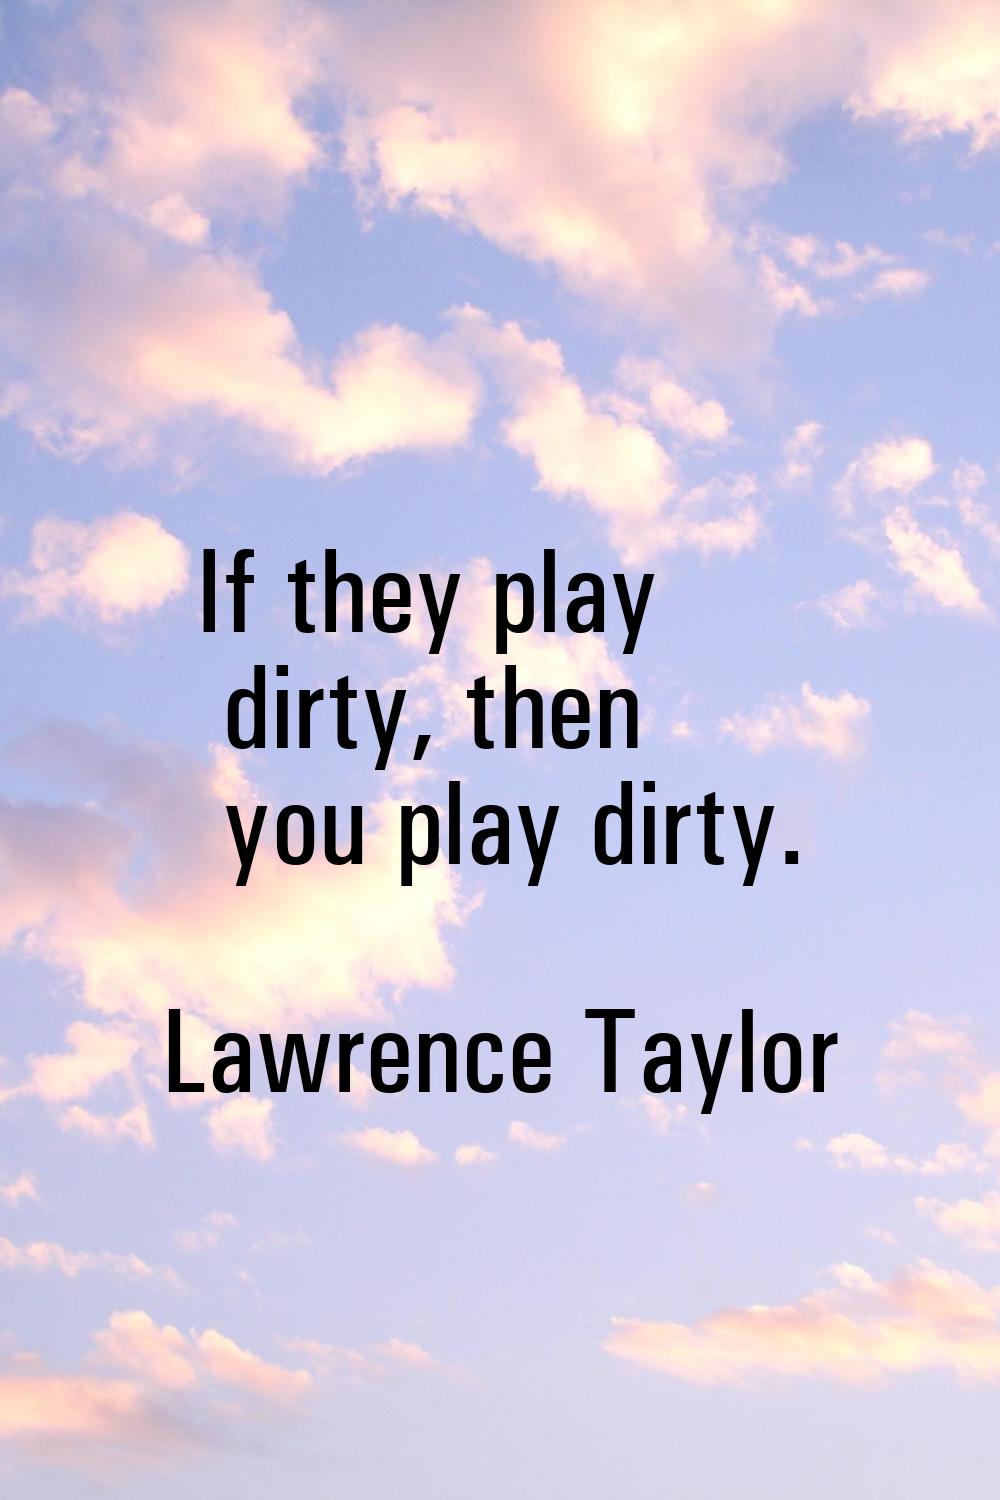 If they play dirty, then you play dirty.